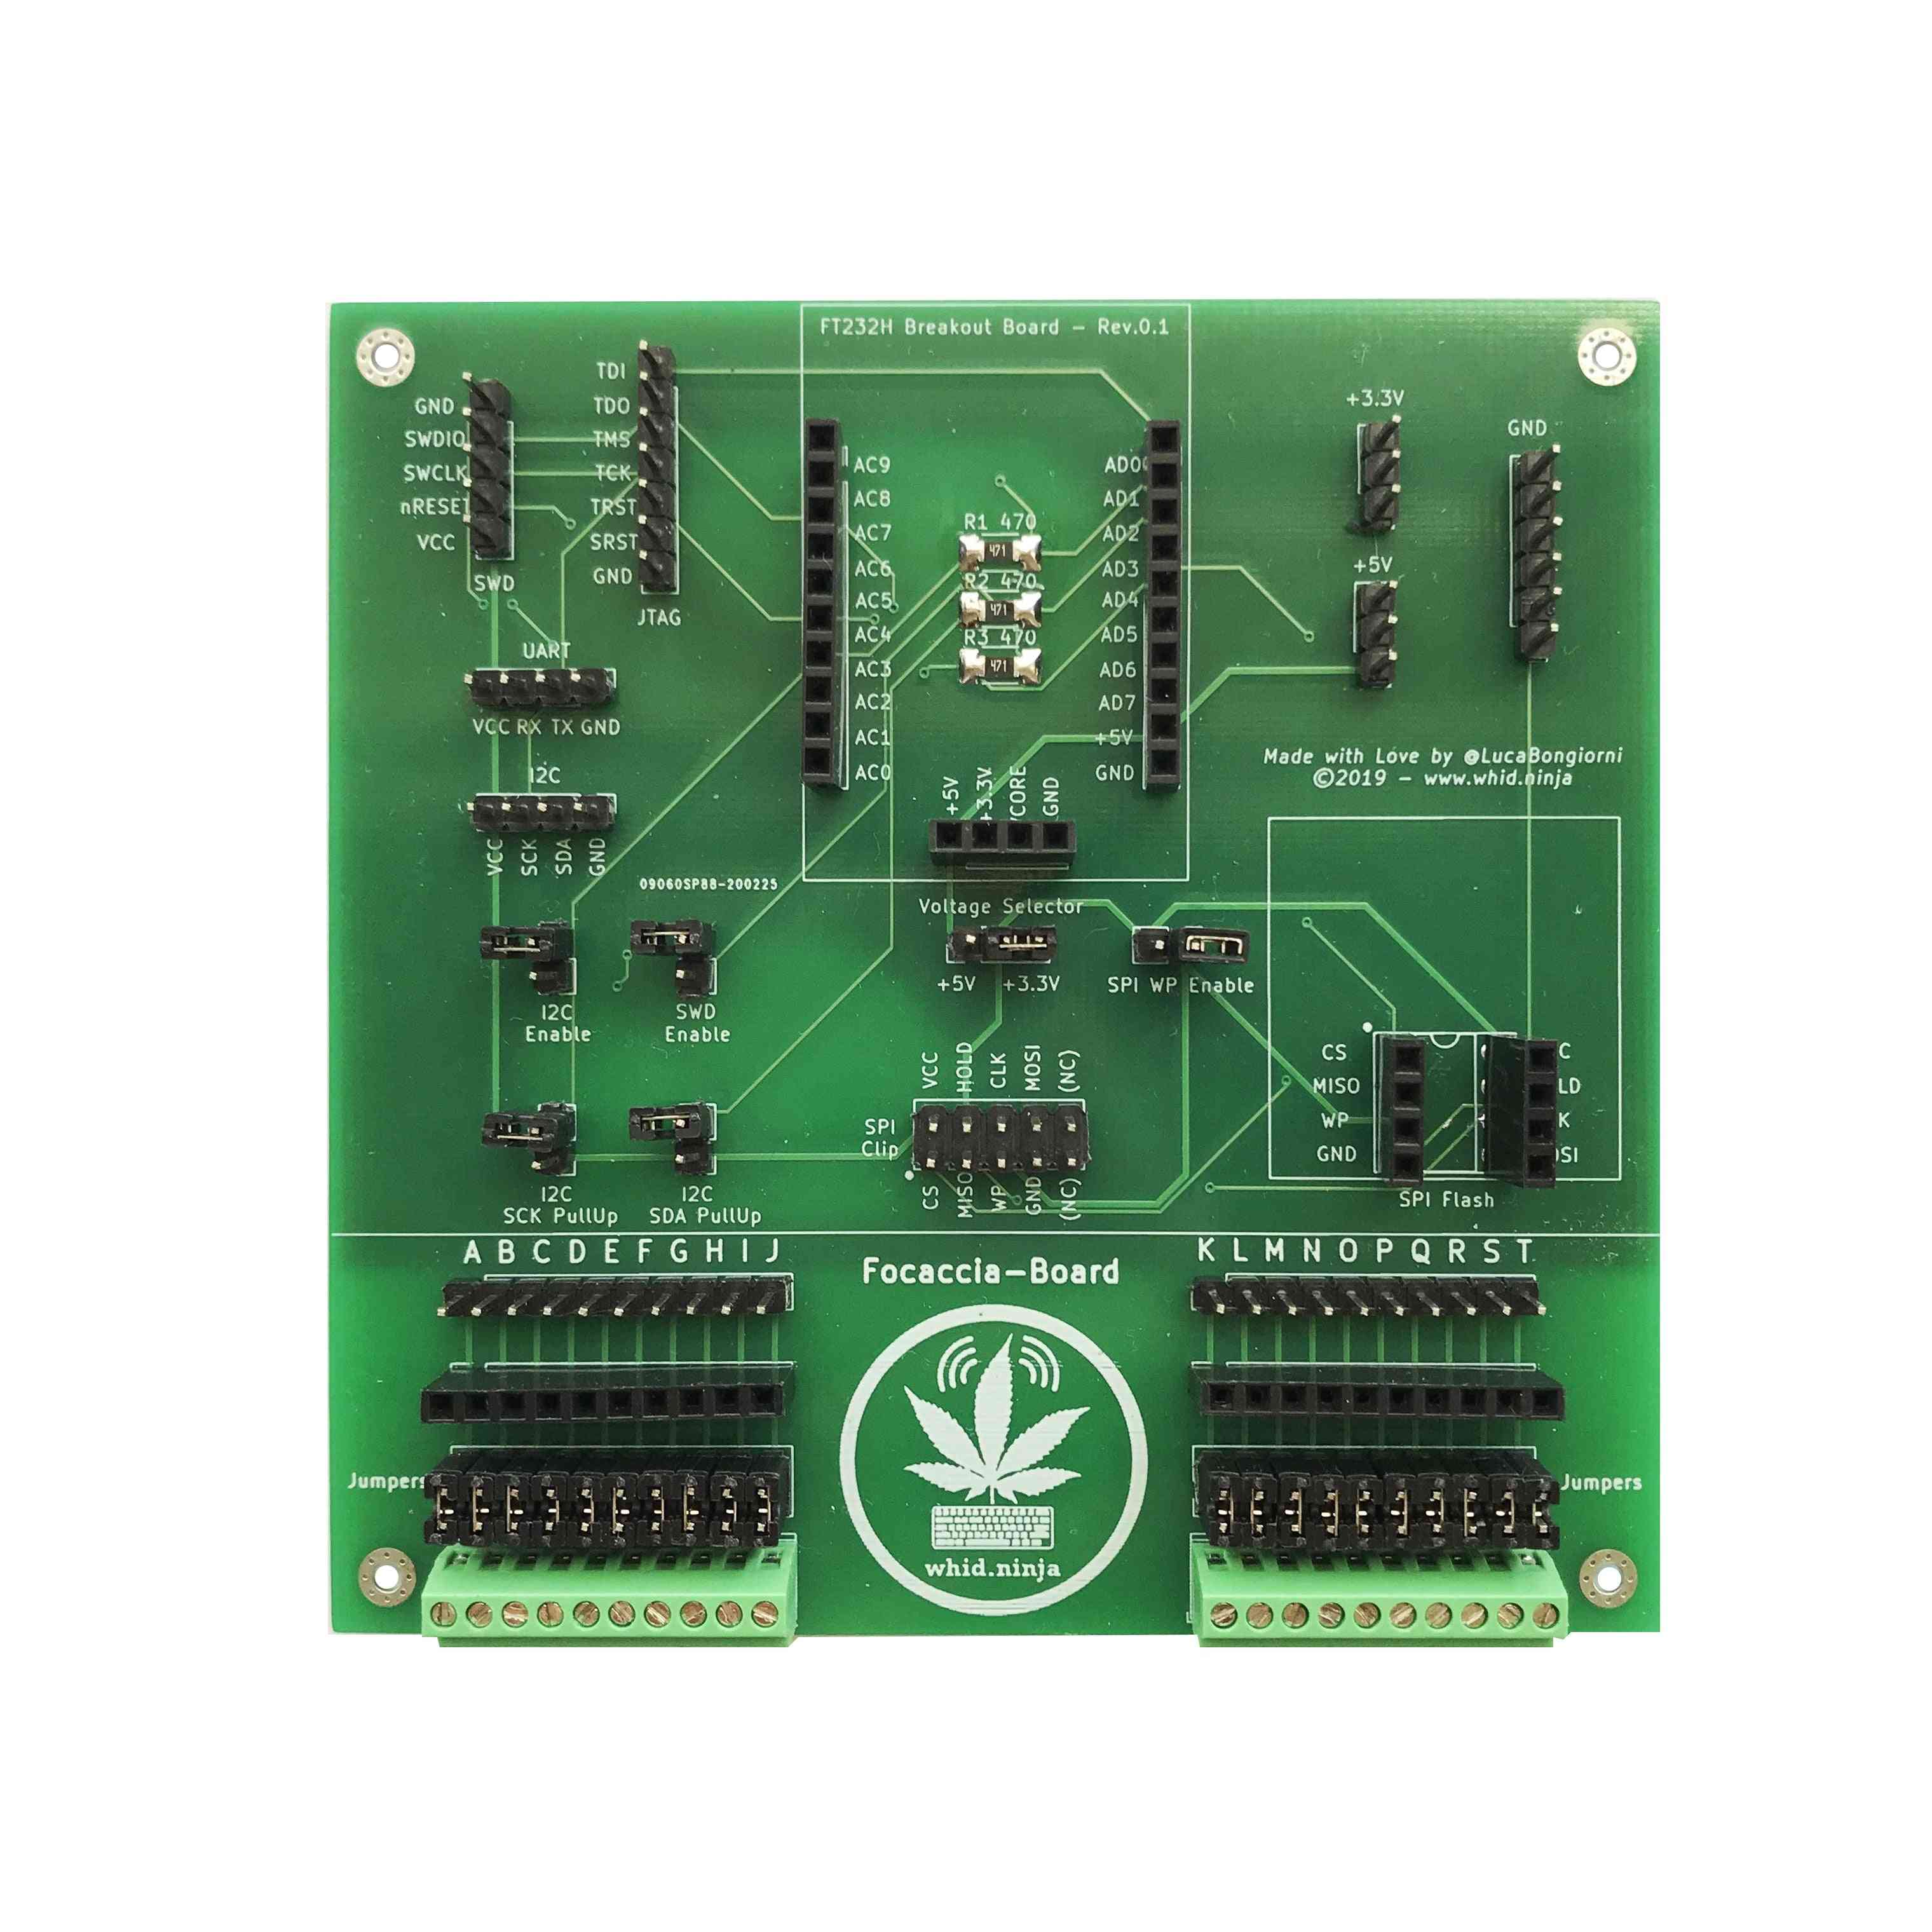 Board A Multipurpose Breakout For The Ft232h.